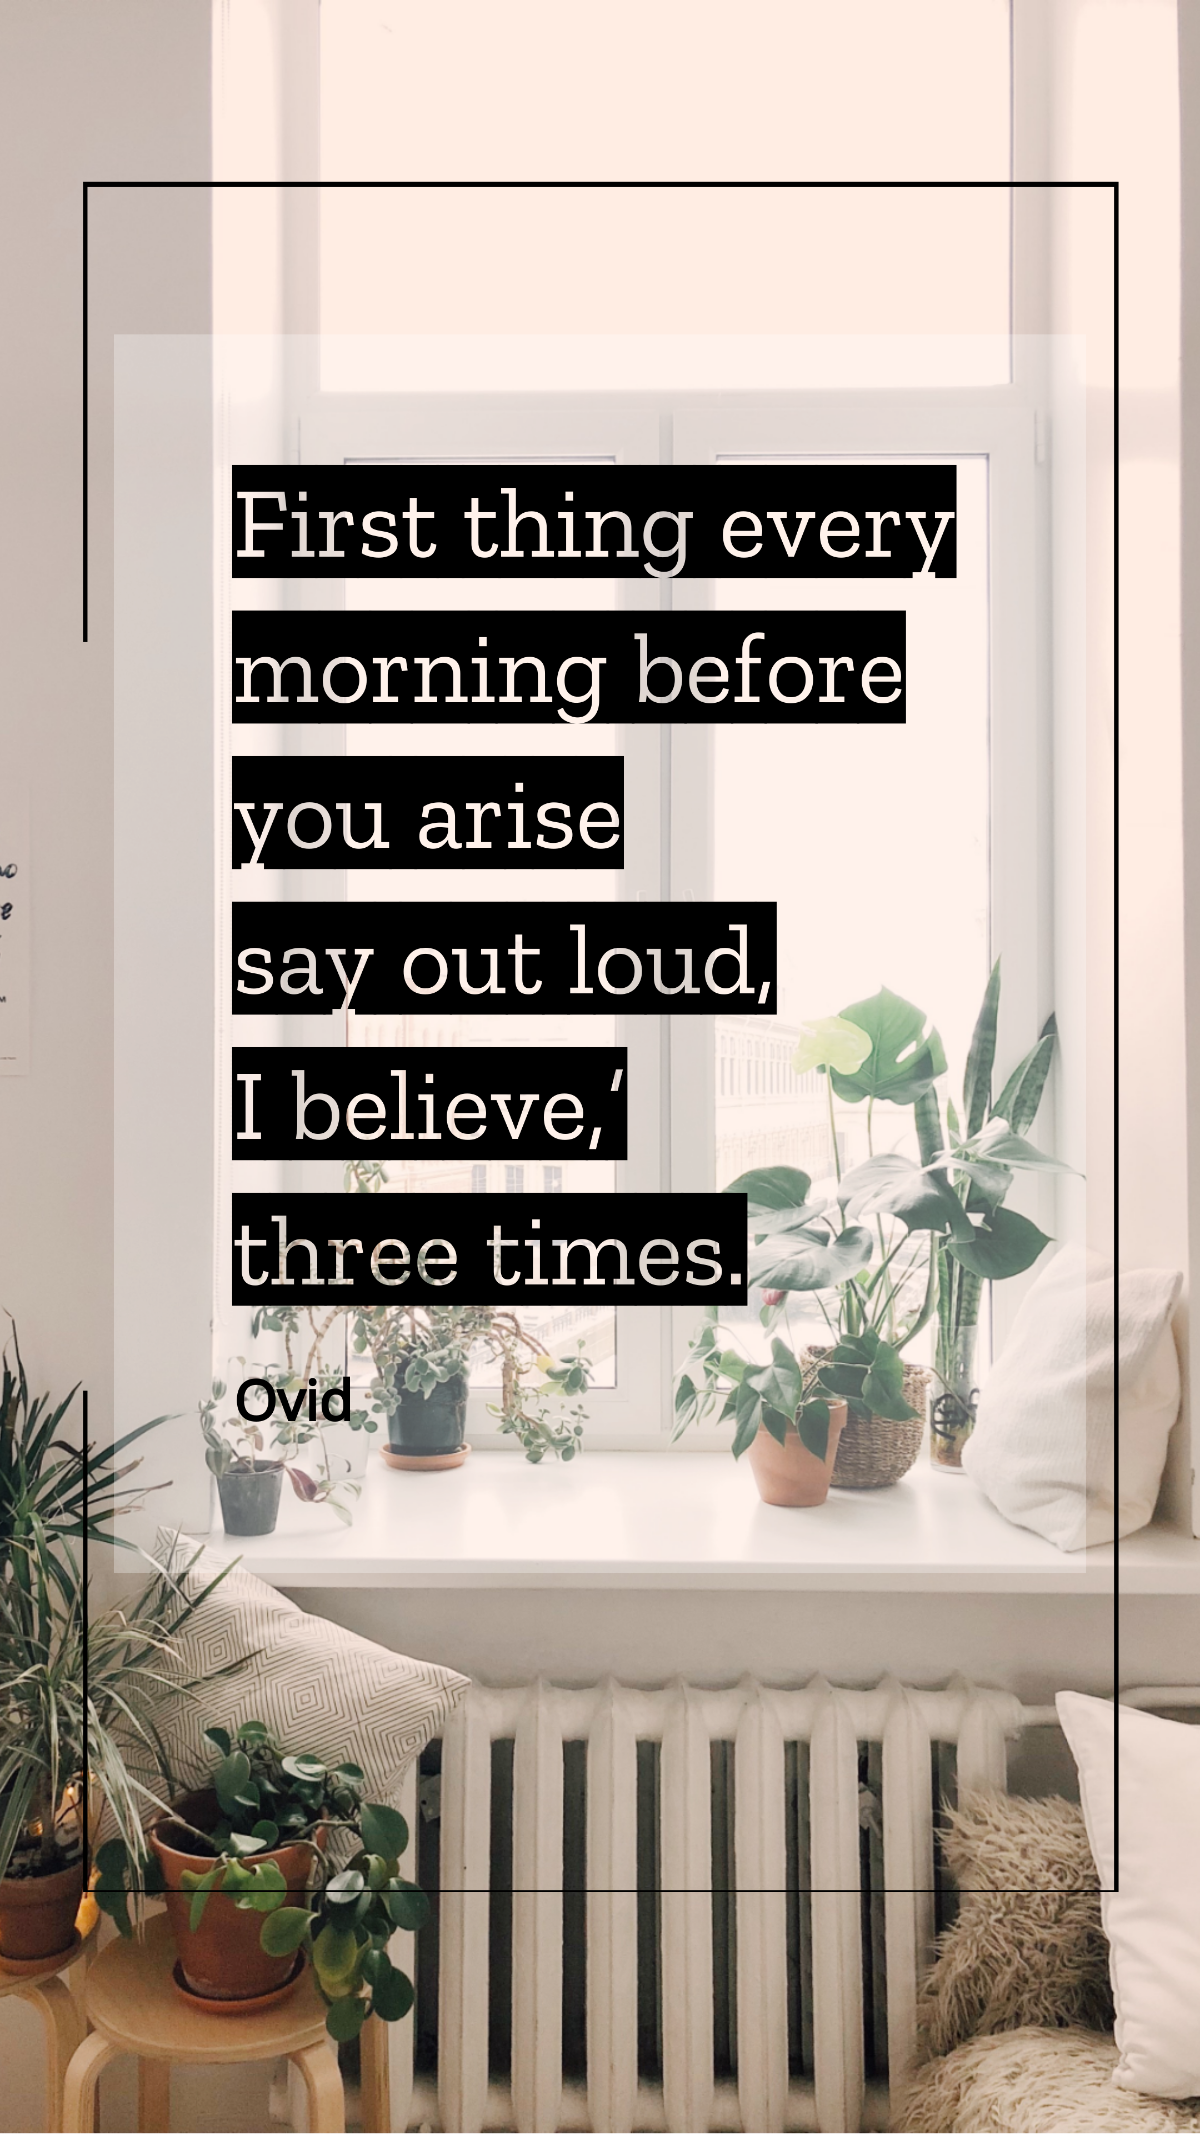 Ovid - First thing every morning before you arise say out loud, ‘I believe,’ three times. Template